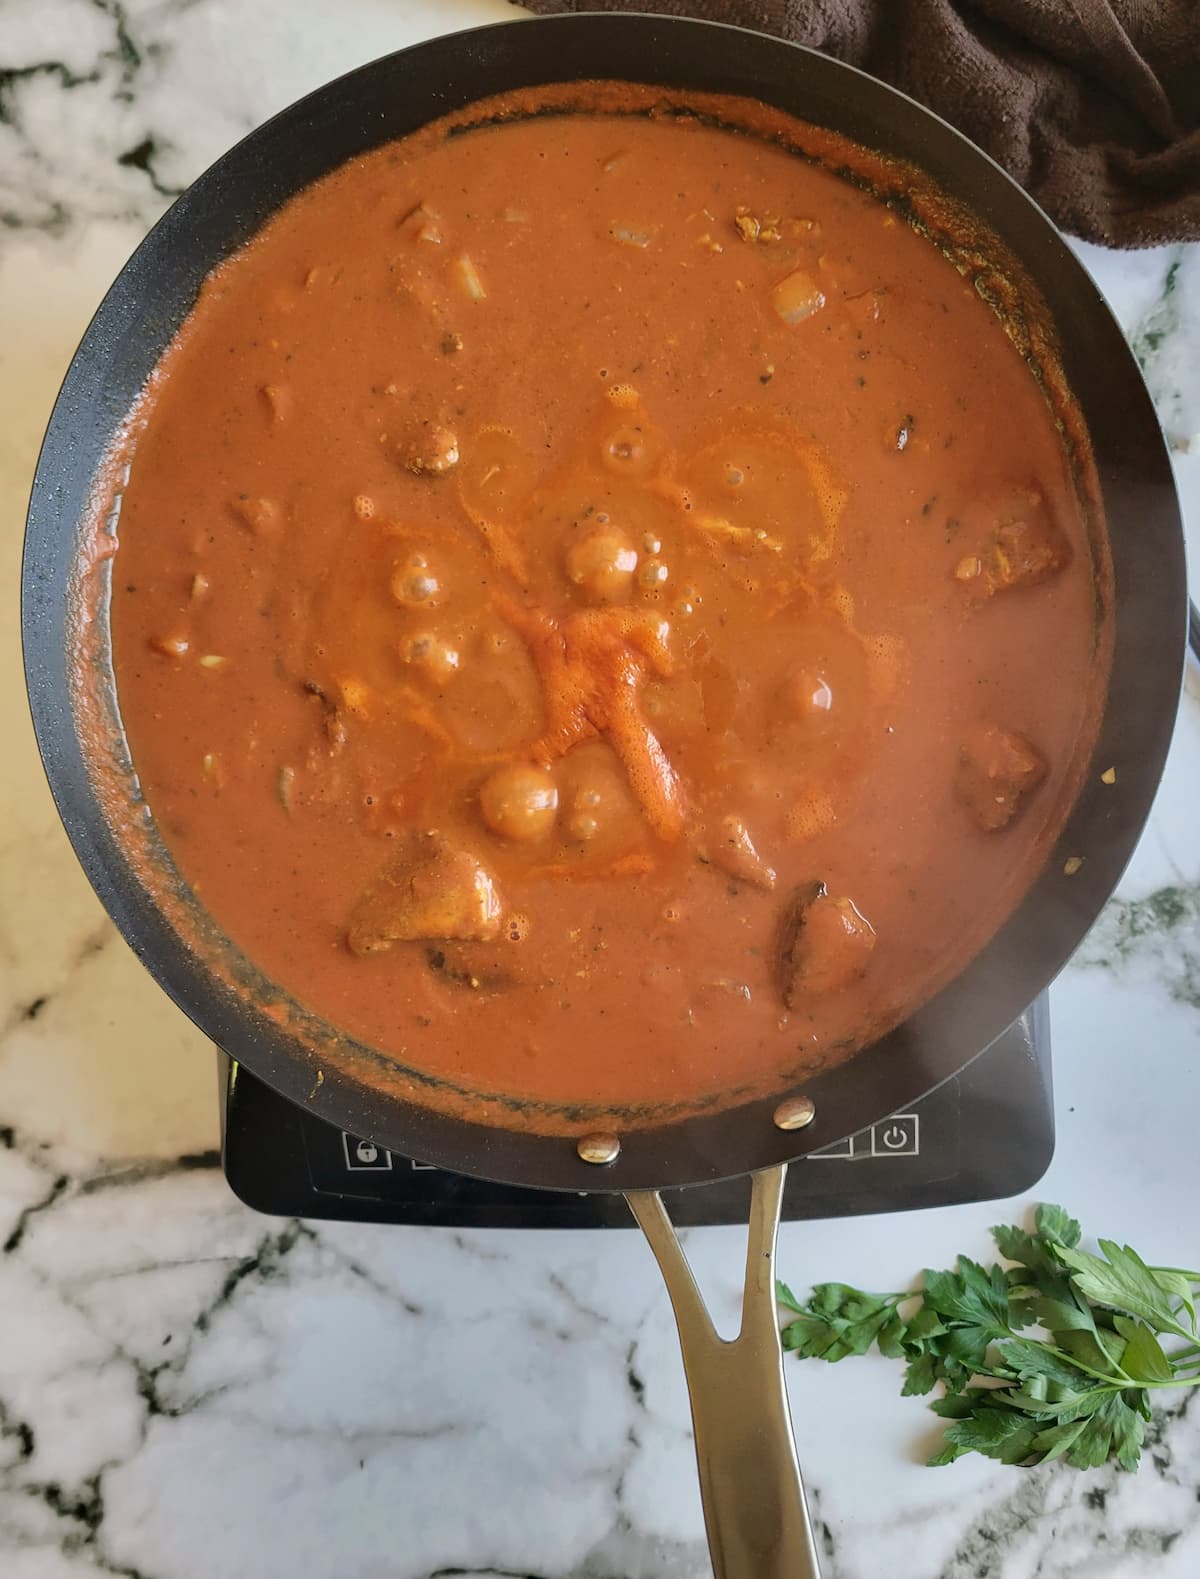 red sauce bubbling in a pan on a burner